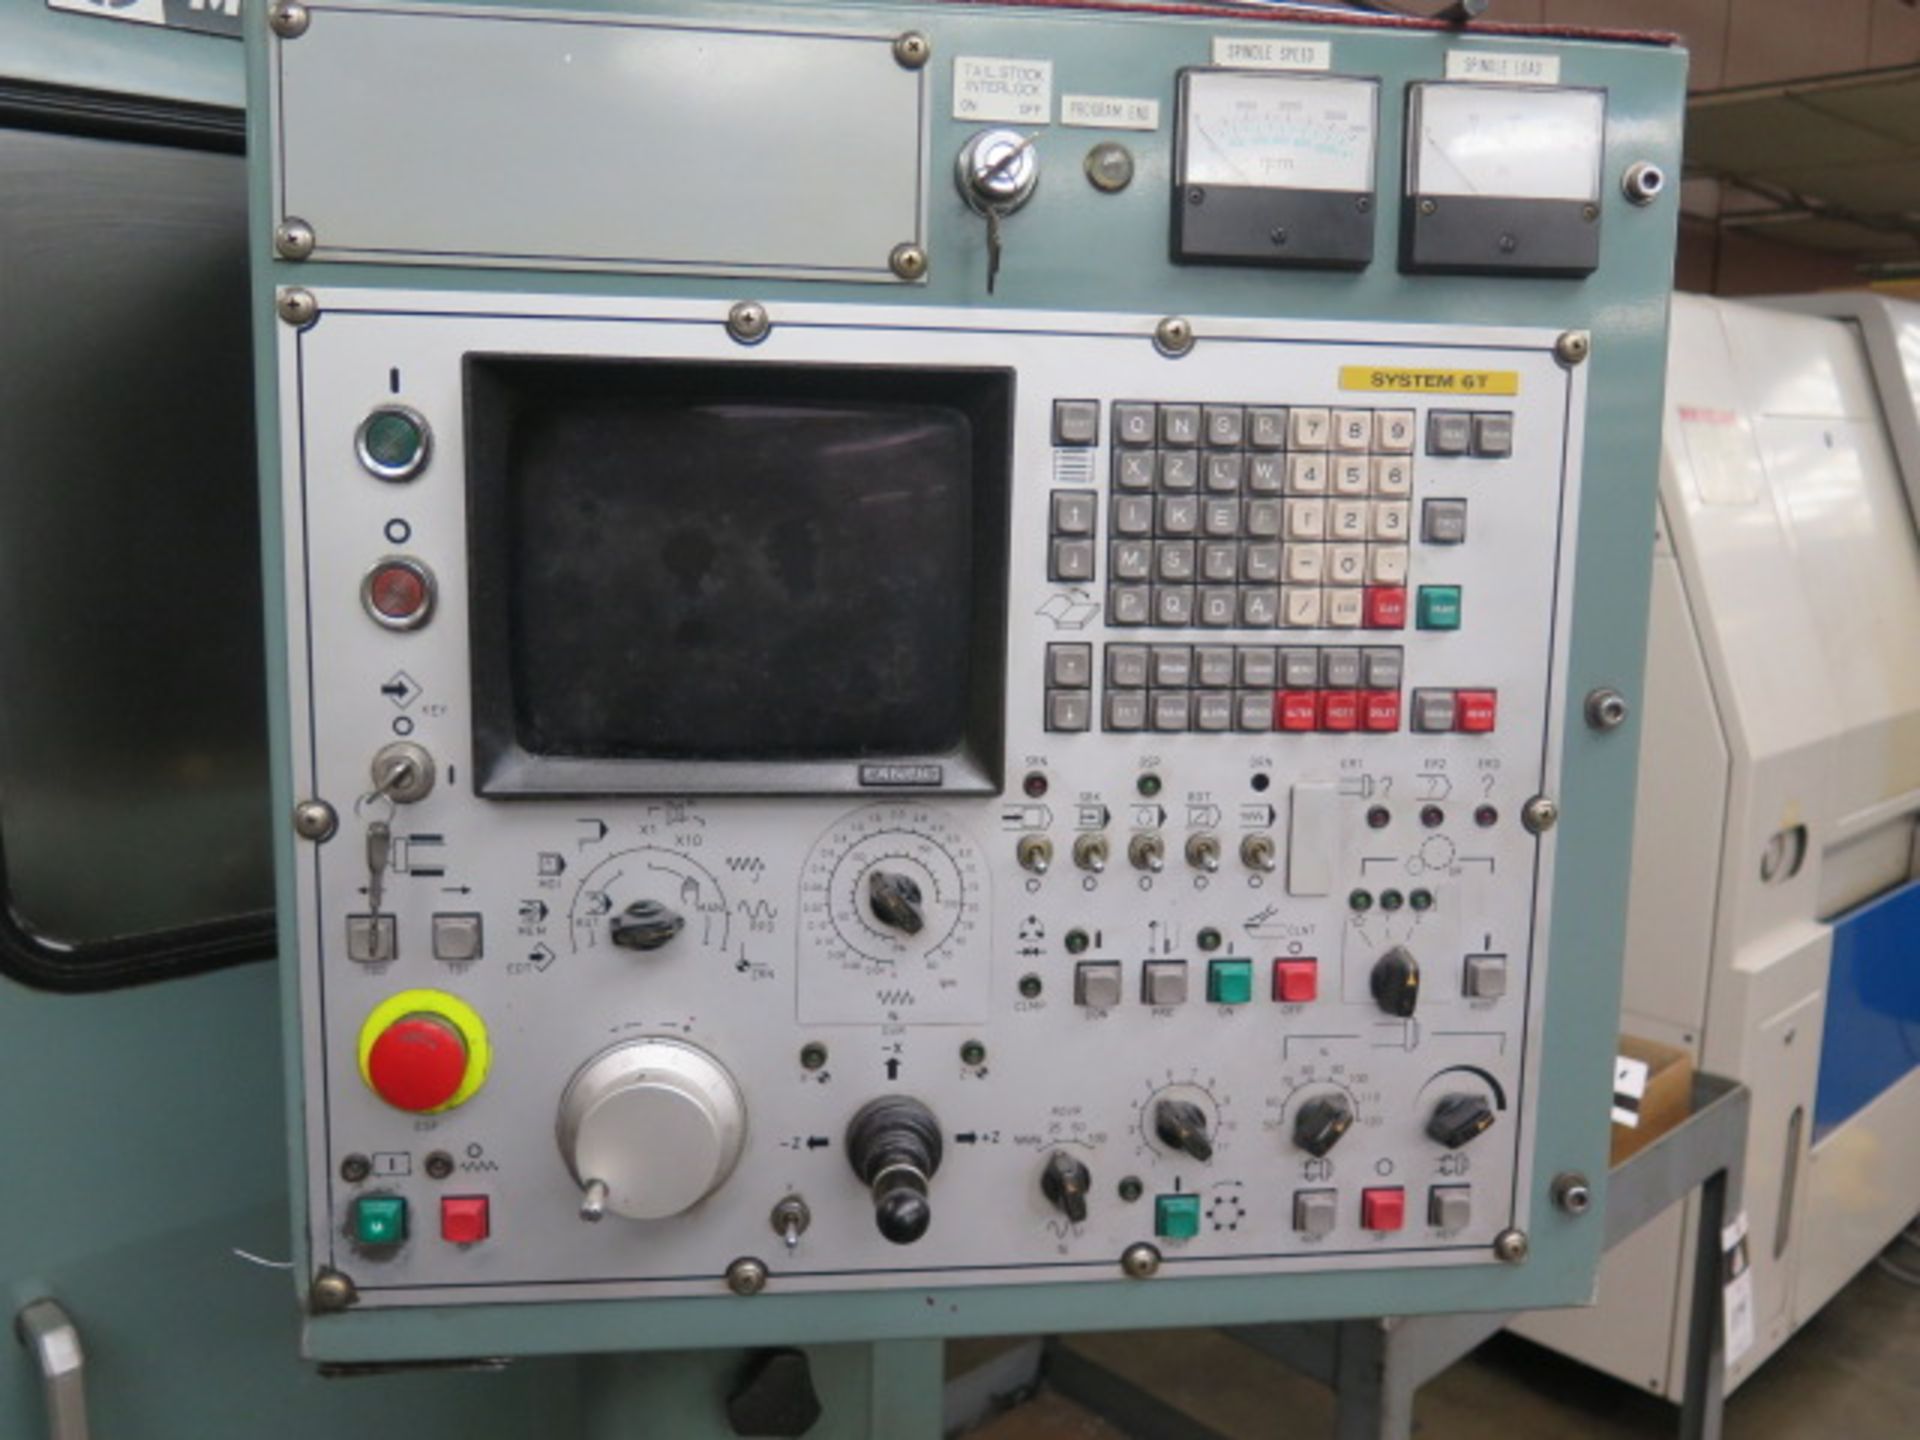 Mori Seiki SL-3A CNC Turning Center s/n 3141 w/ Fanuc 6T Controls, 12-Station Turret, SOLD AS IS - Image 11 of 15